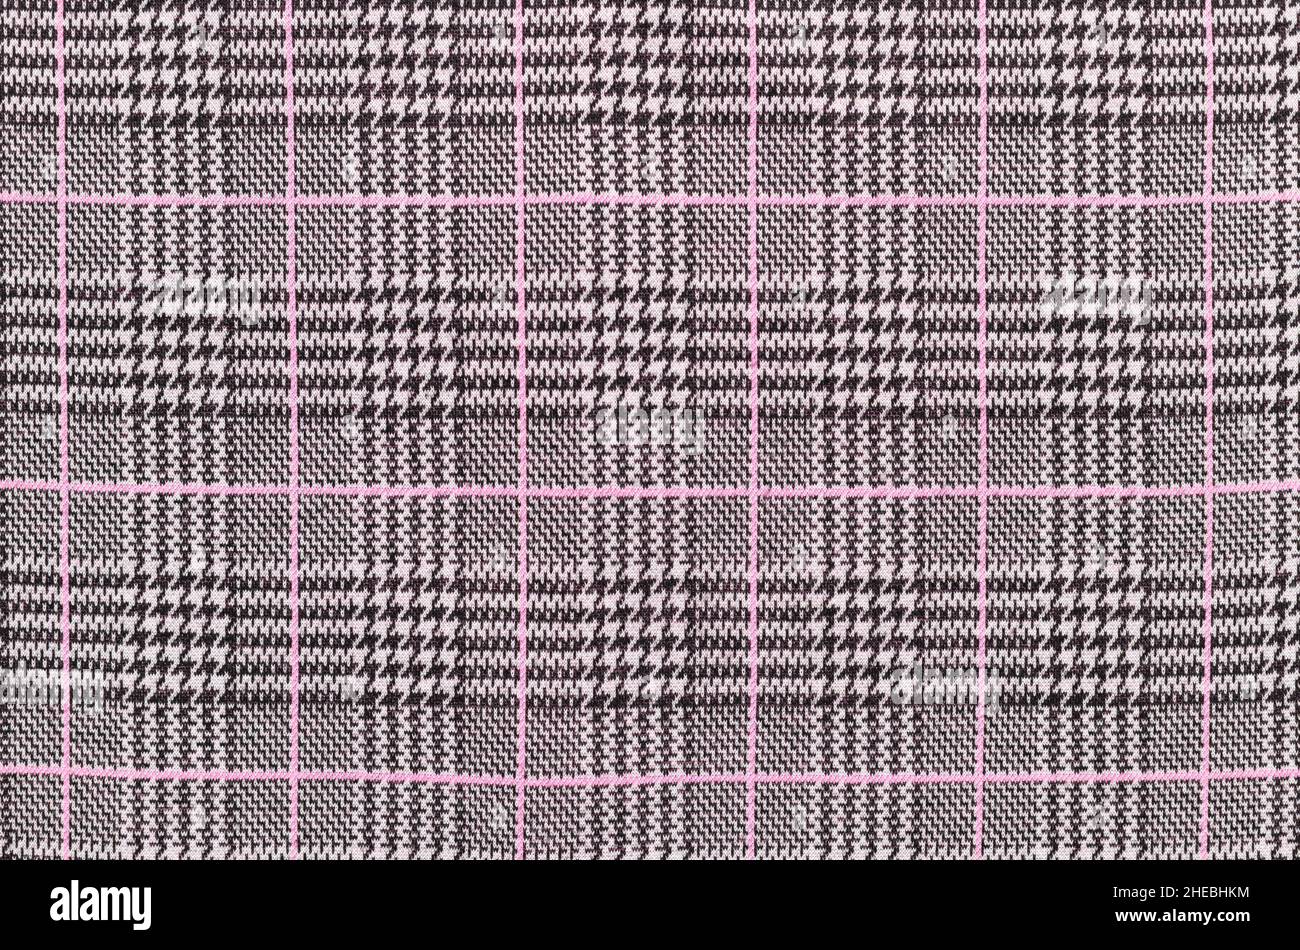 Black, white and pink tartan texture background. houndstooth pattern Stock Photo